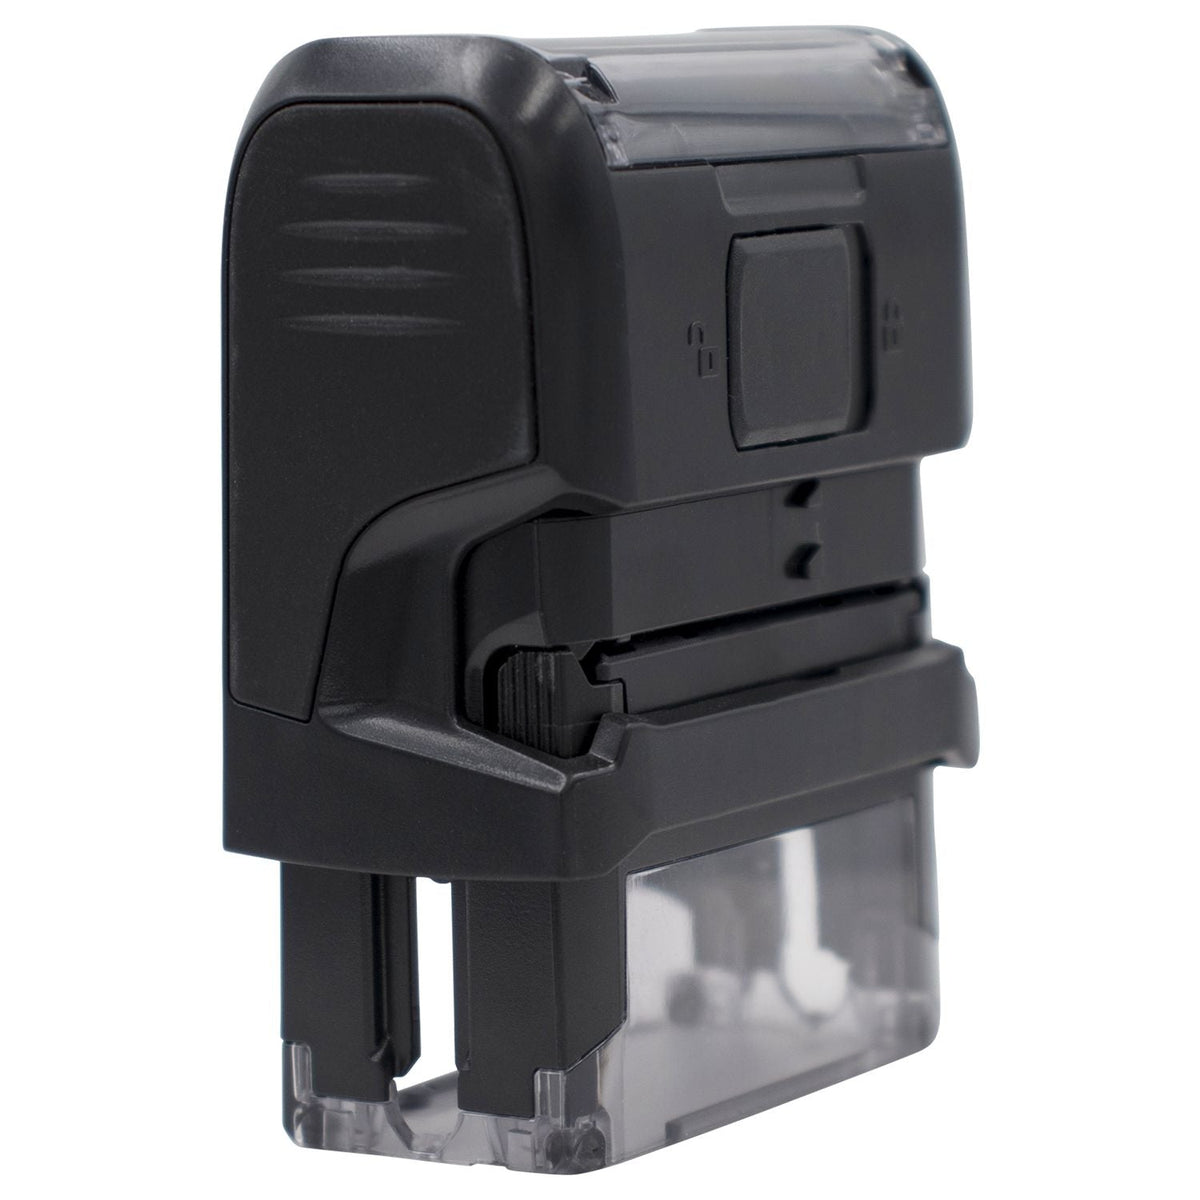 Self-Inking No Mail Receptacle Stamp Back View